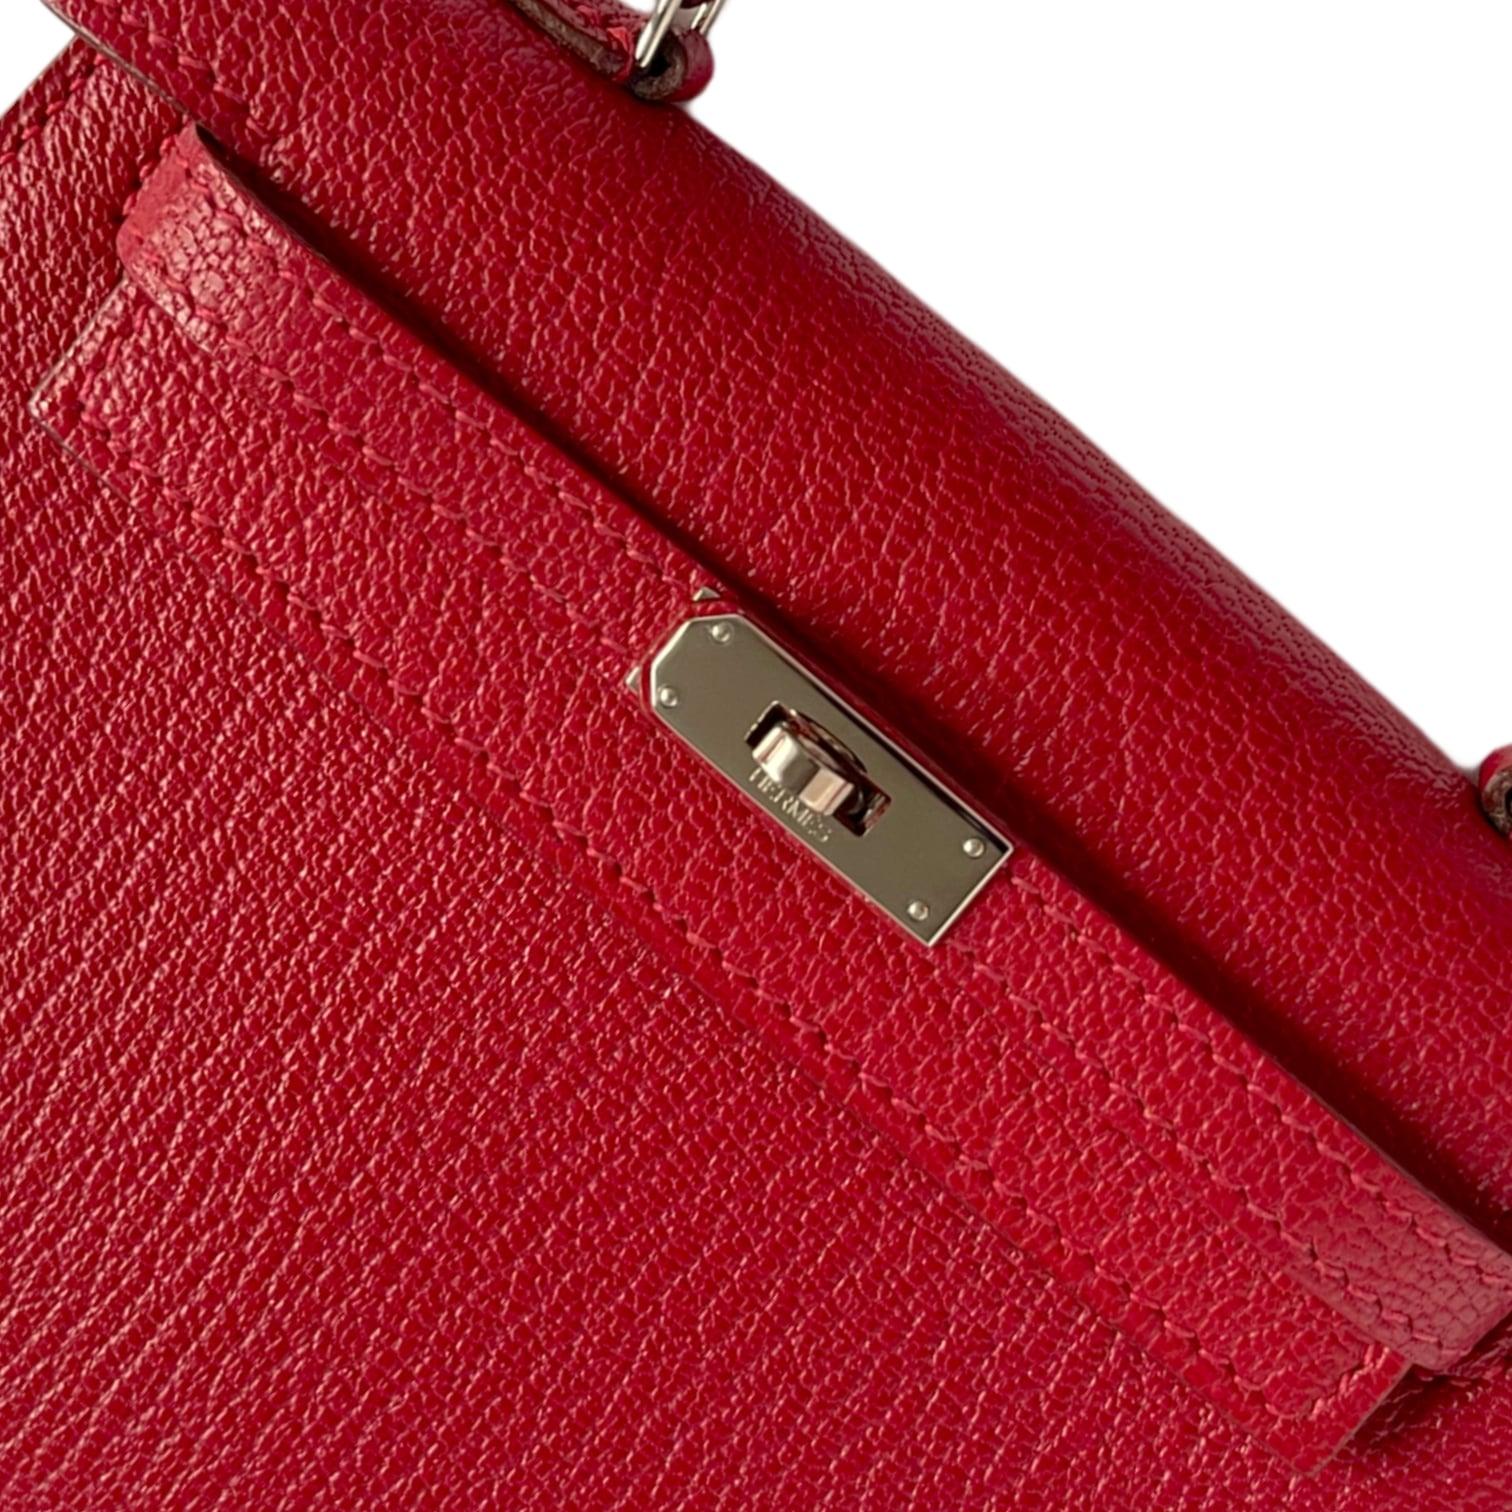 1stdibs Exclusive From Three Over Six

Brand: Hermès 
Style: Kelly Sellier
Size: Micro 15cm
Color: Rouge
Leather: Chèvre 
Hardware: Palladium
Stamp: N 2010

Vintage mint: The item is vintage but given its age is in impeccable condition. There may be